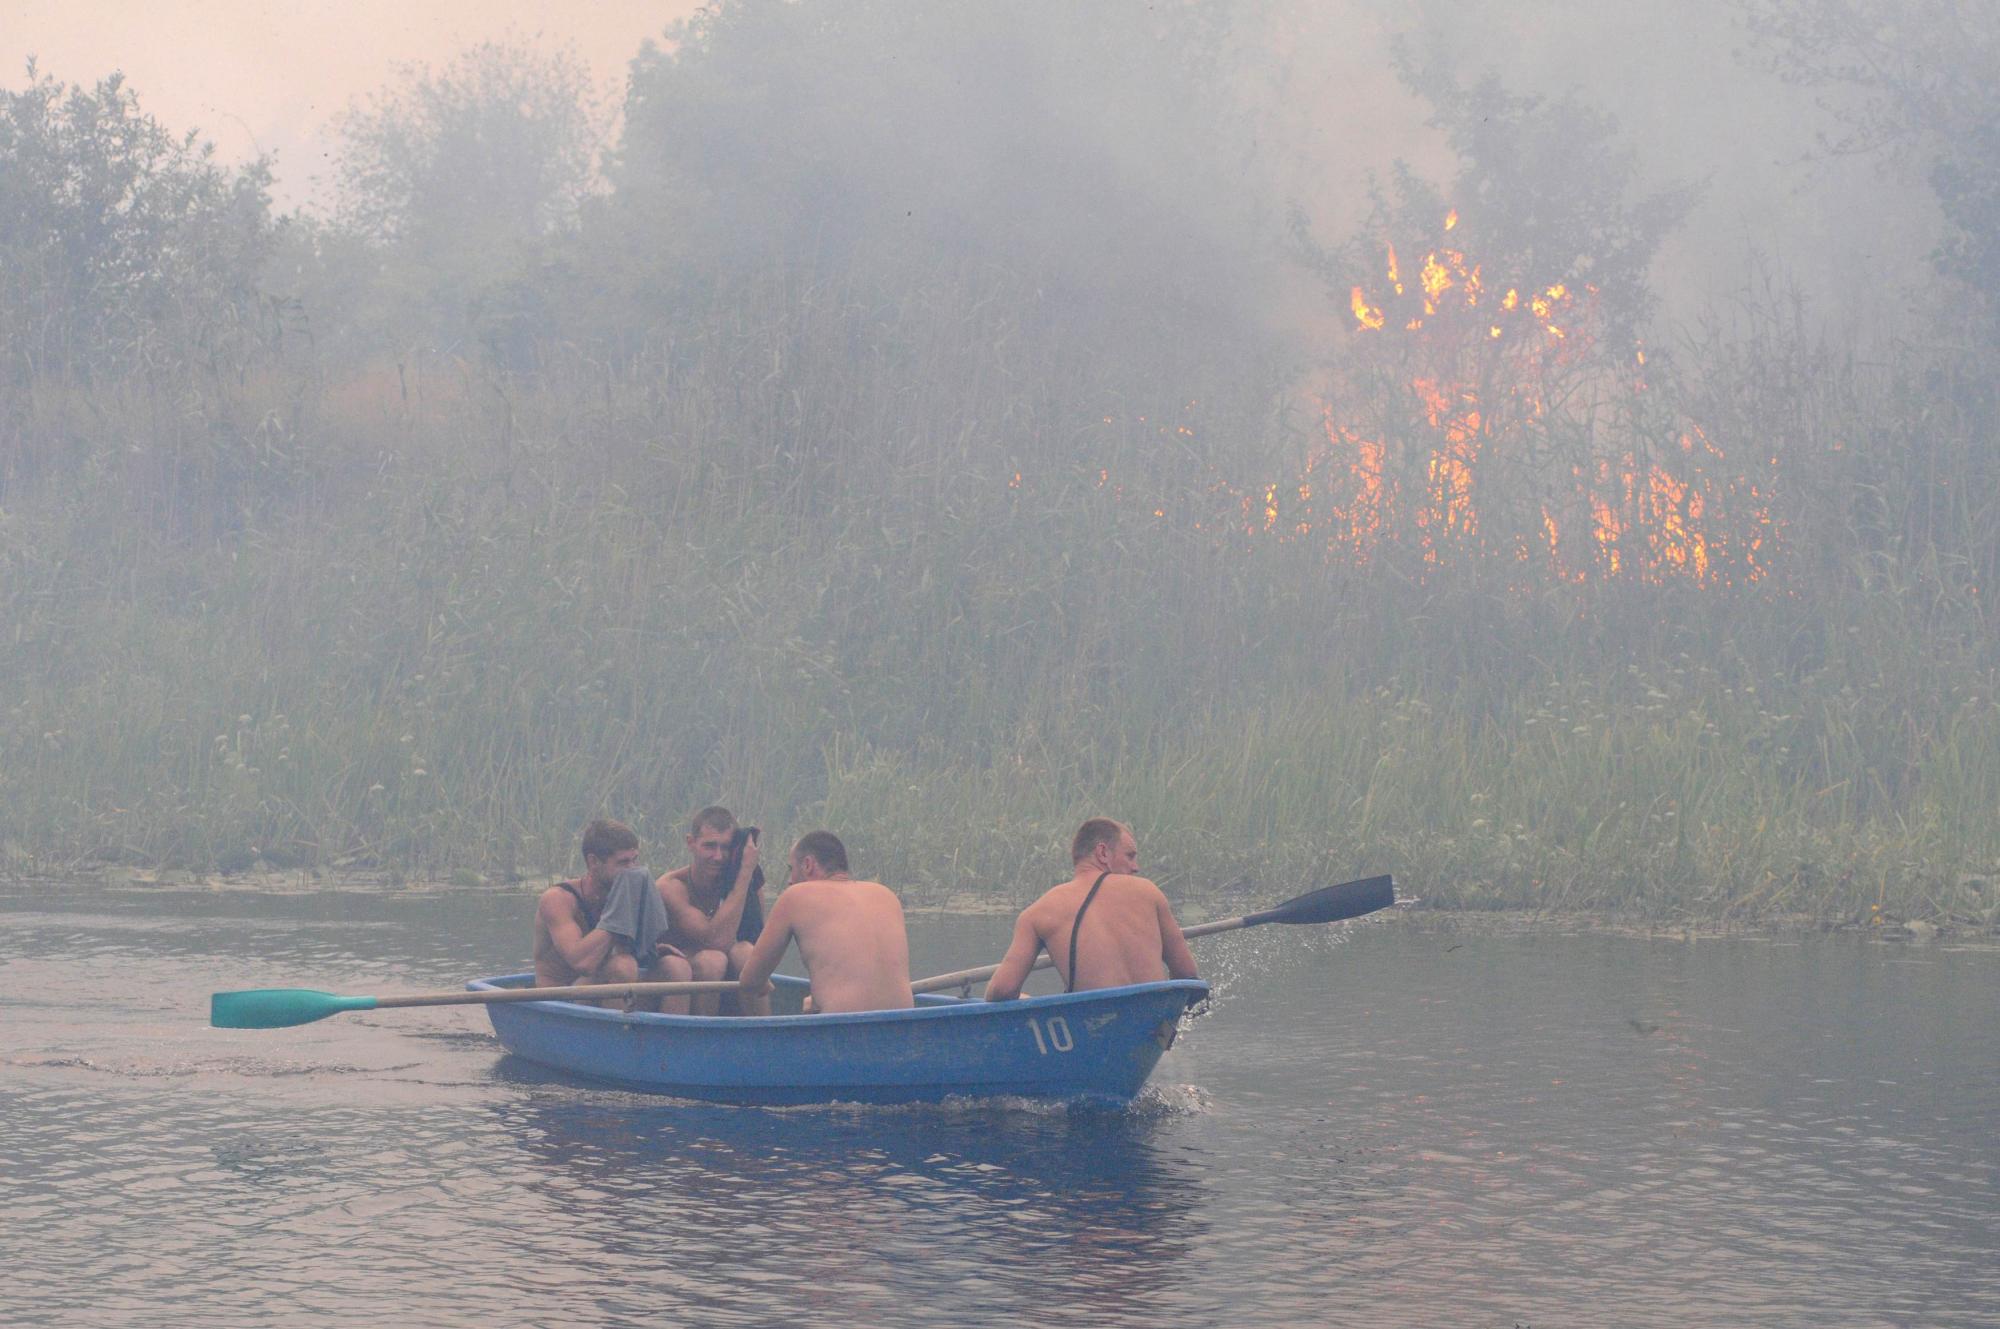 Lingering drought causes fire in Russia